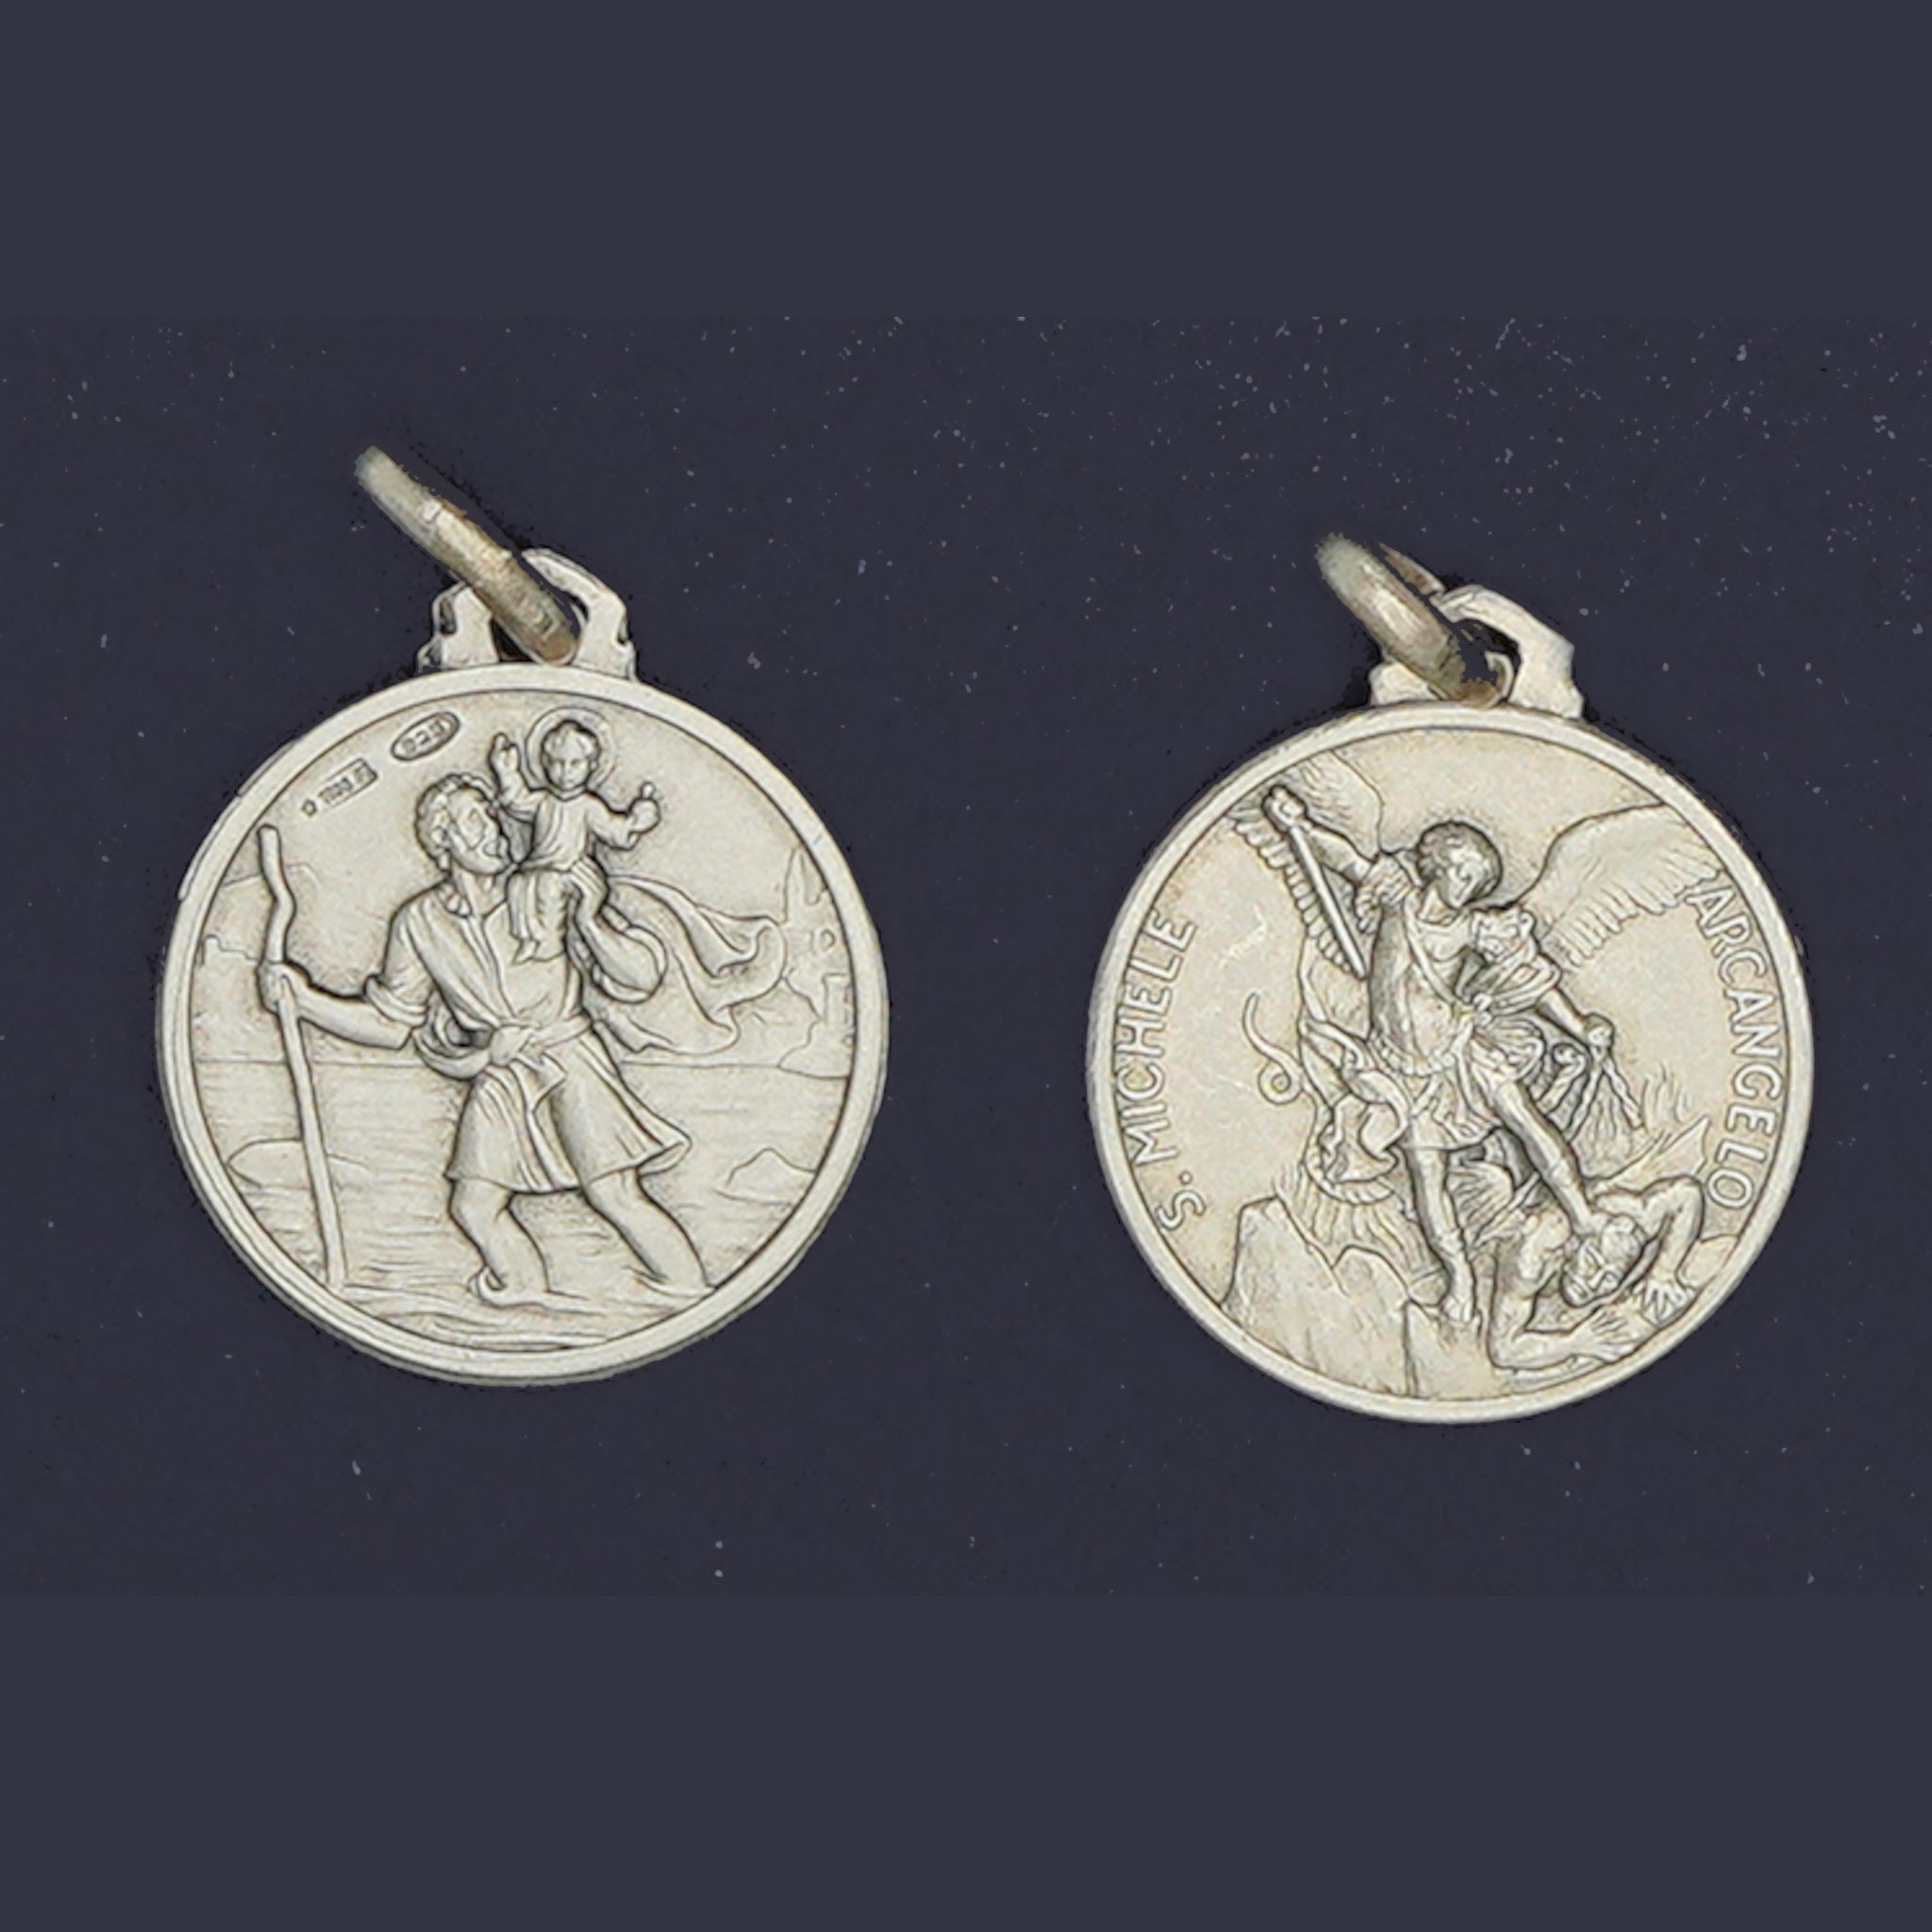 ST. CHRISTOPHER - ST. MICHAEL PENDANT (DOUBLE-SIDED)